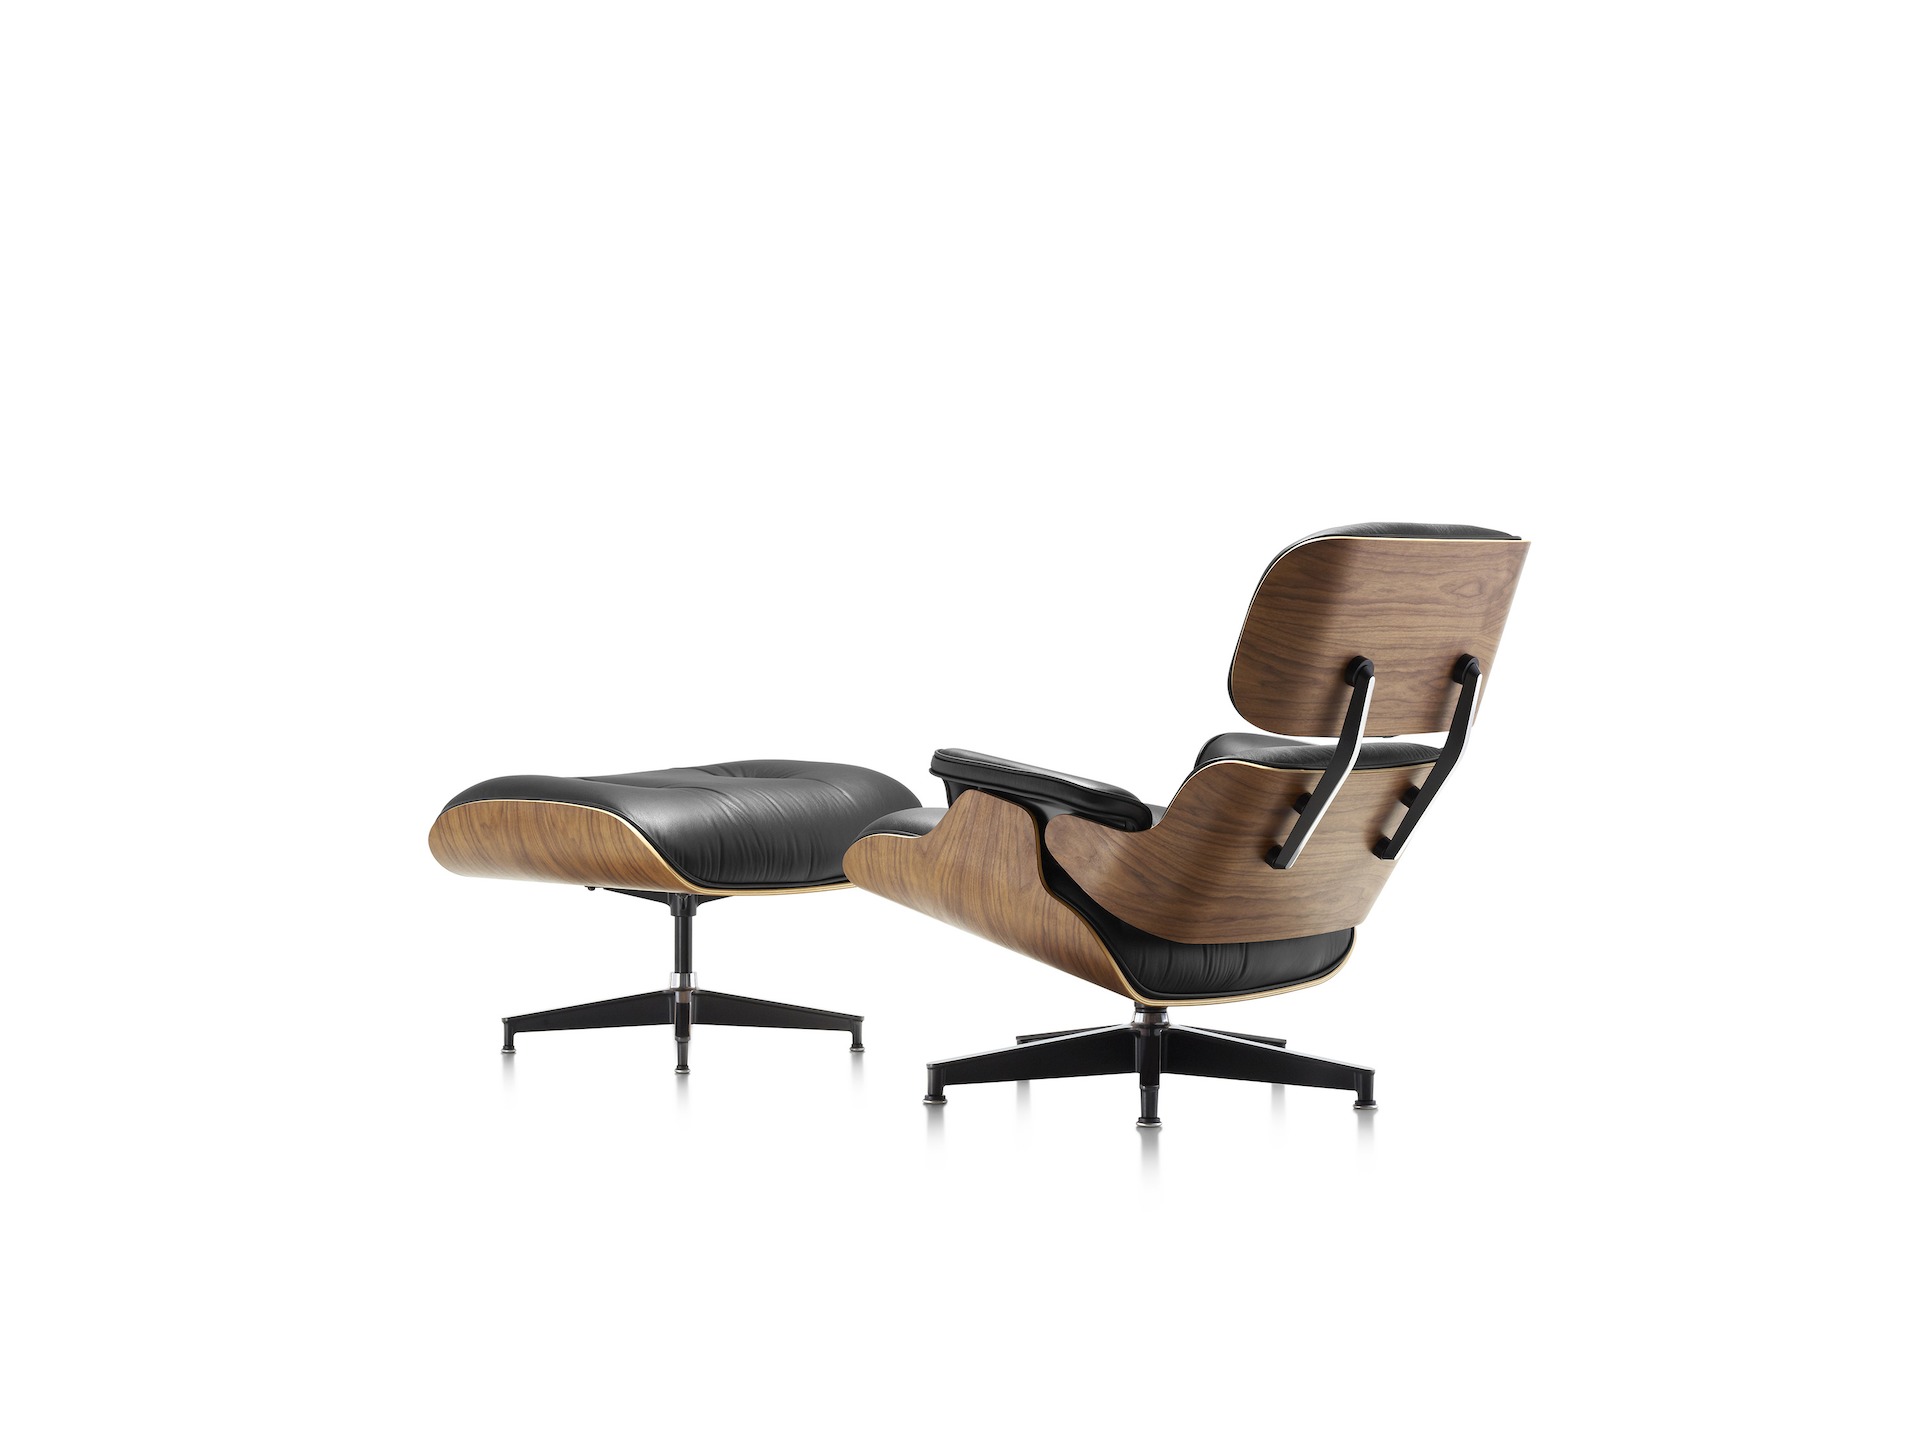 Eames Lounge Chair–Classic 3D Product Models - Herman Miller